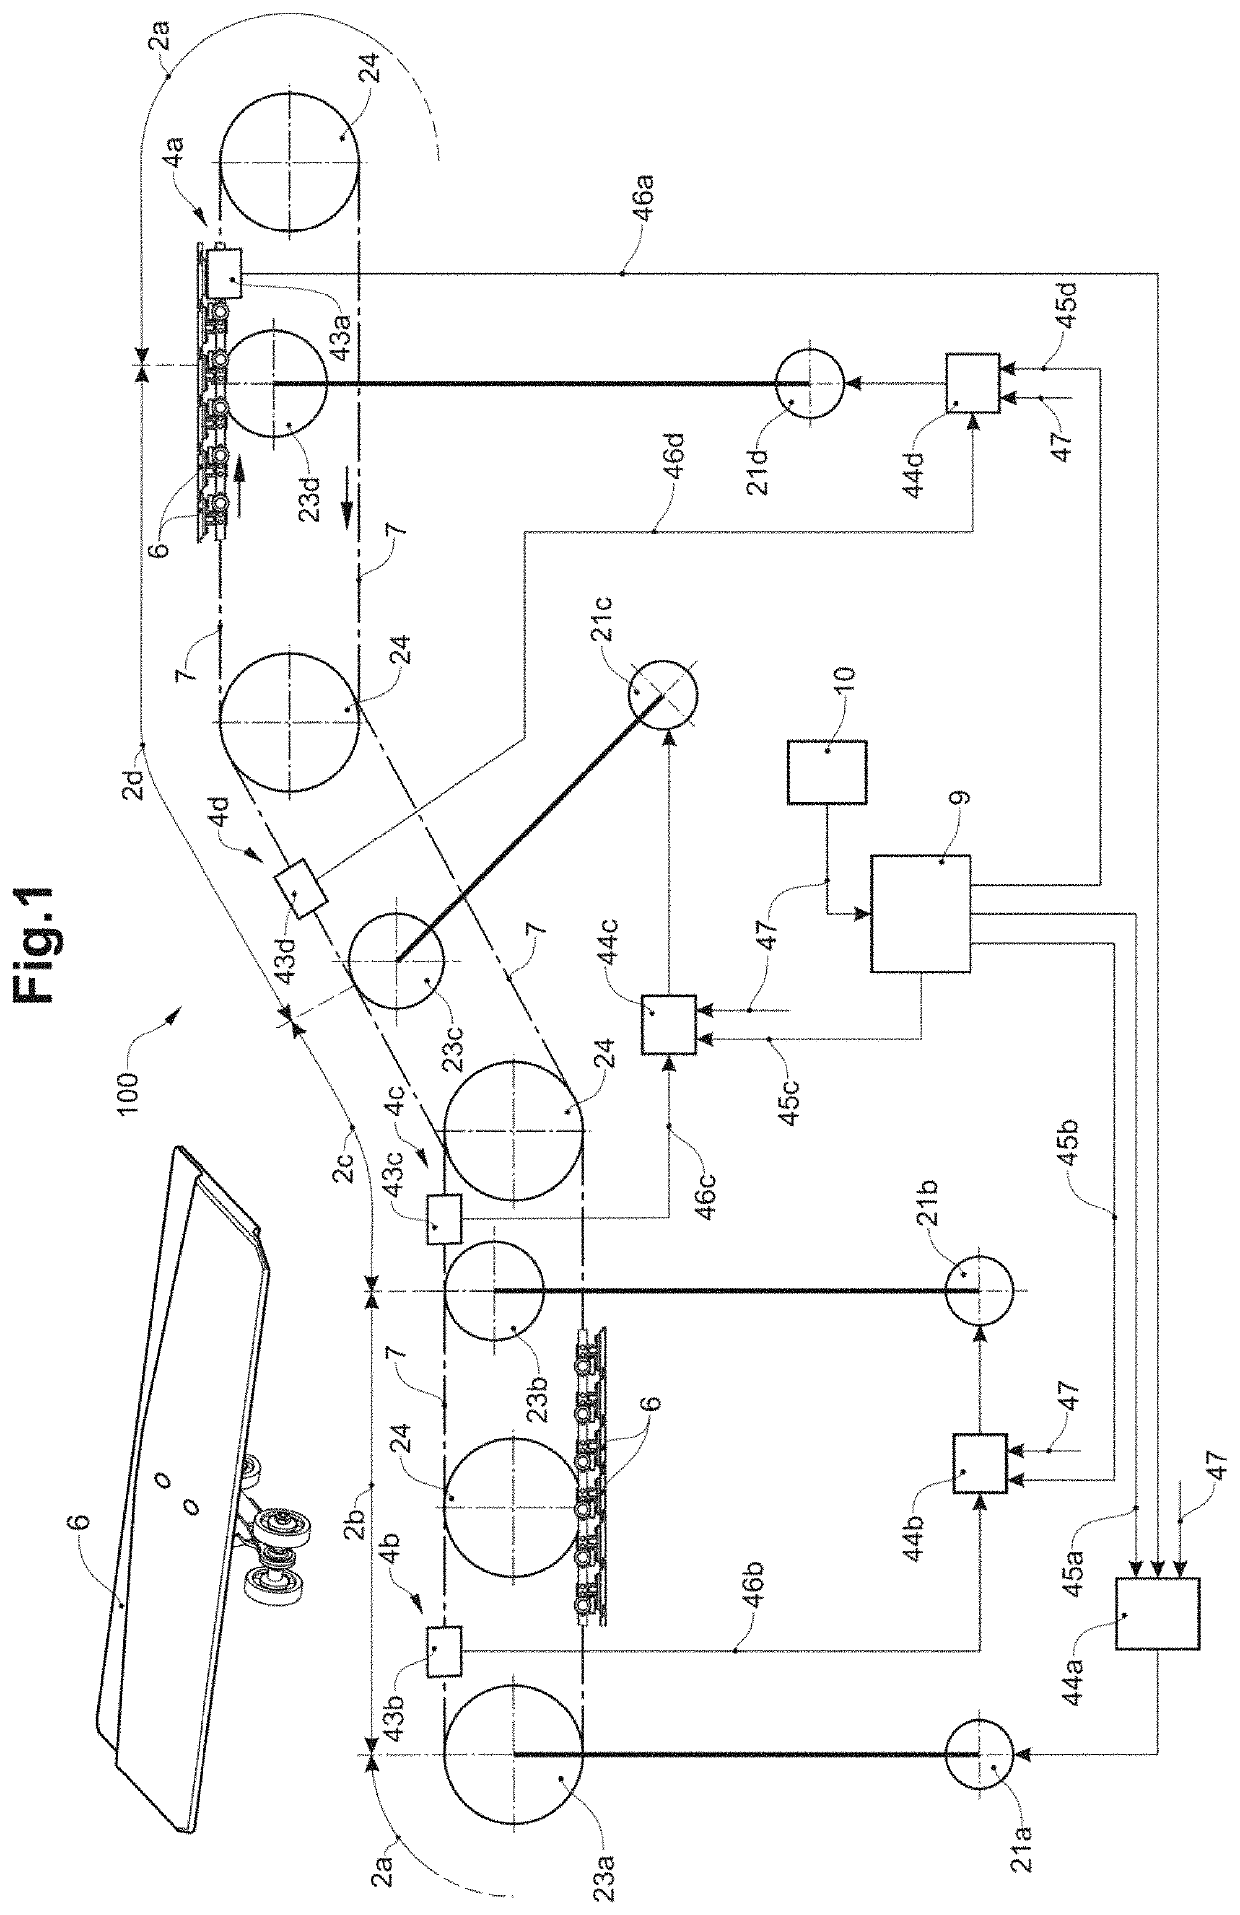 Measuring device for acquiring measurement values for measuring a tension in a conveying system, as well as a conveying unit and a conveying facility